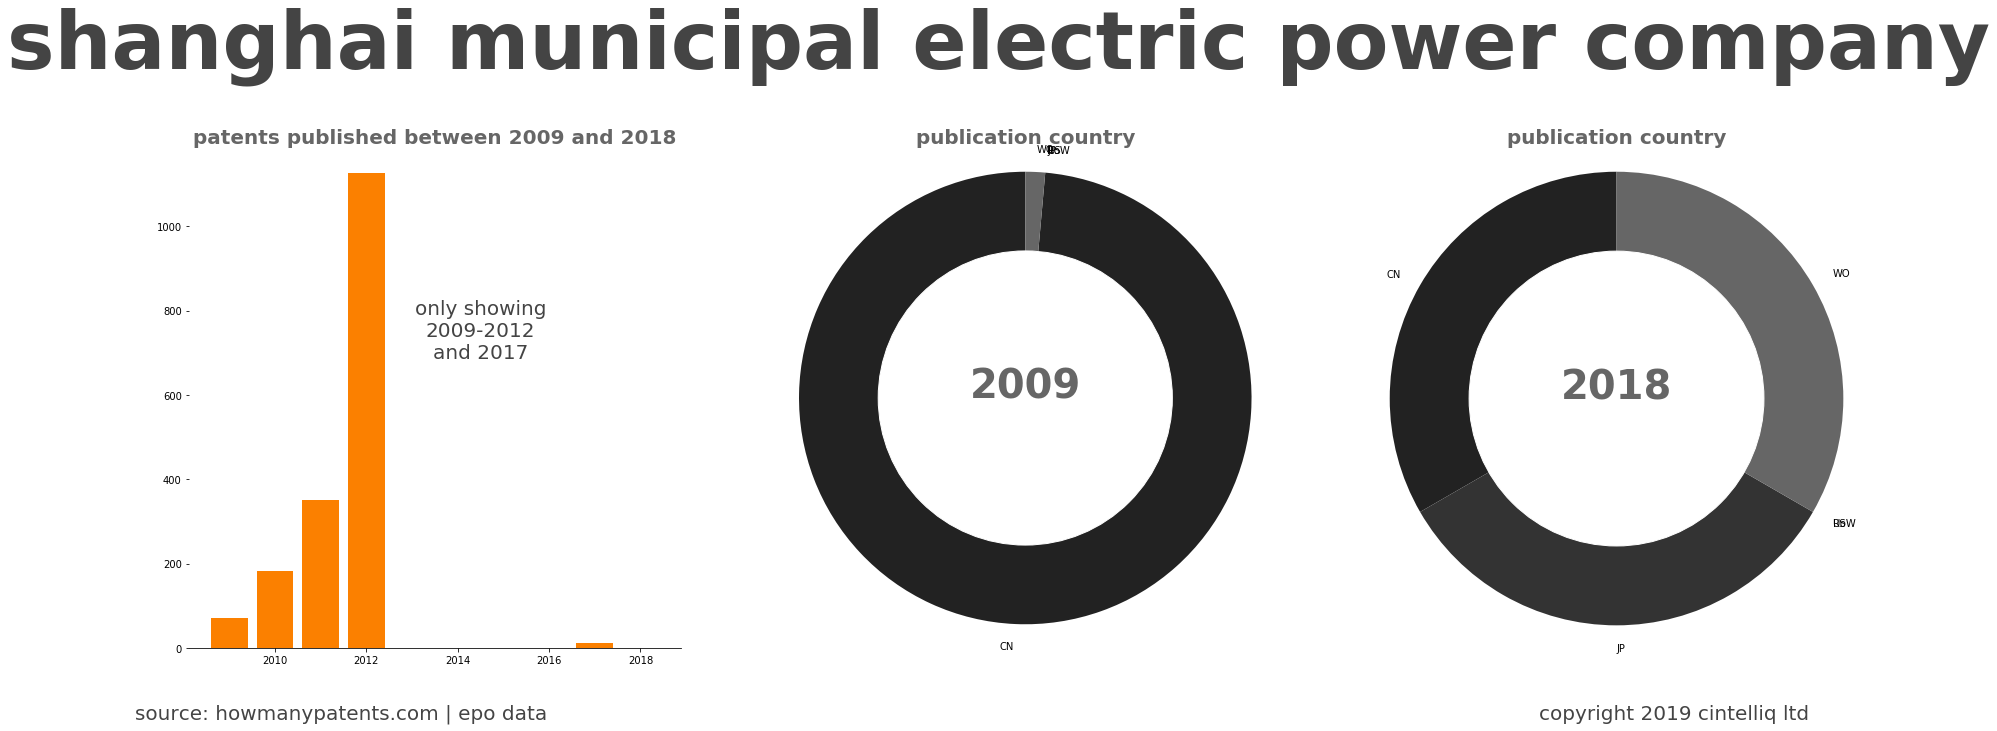 summary of patents for Shanghai Municipal Electric Power Company